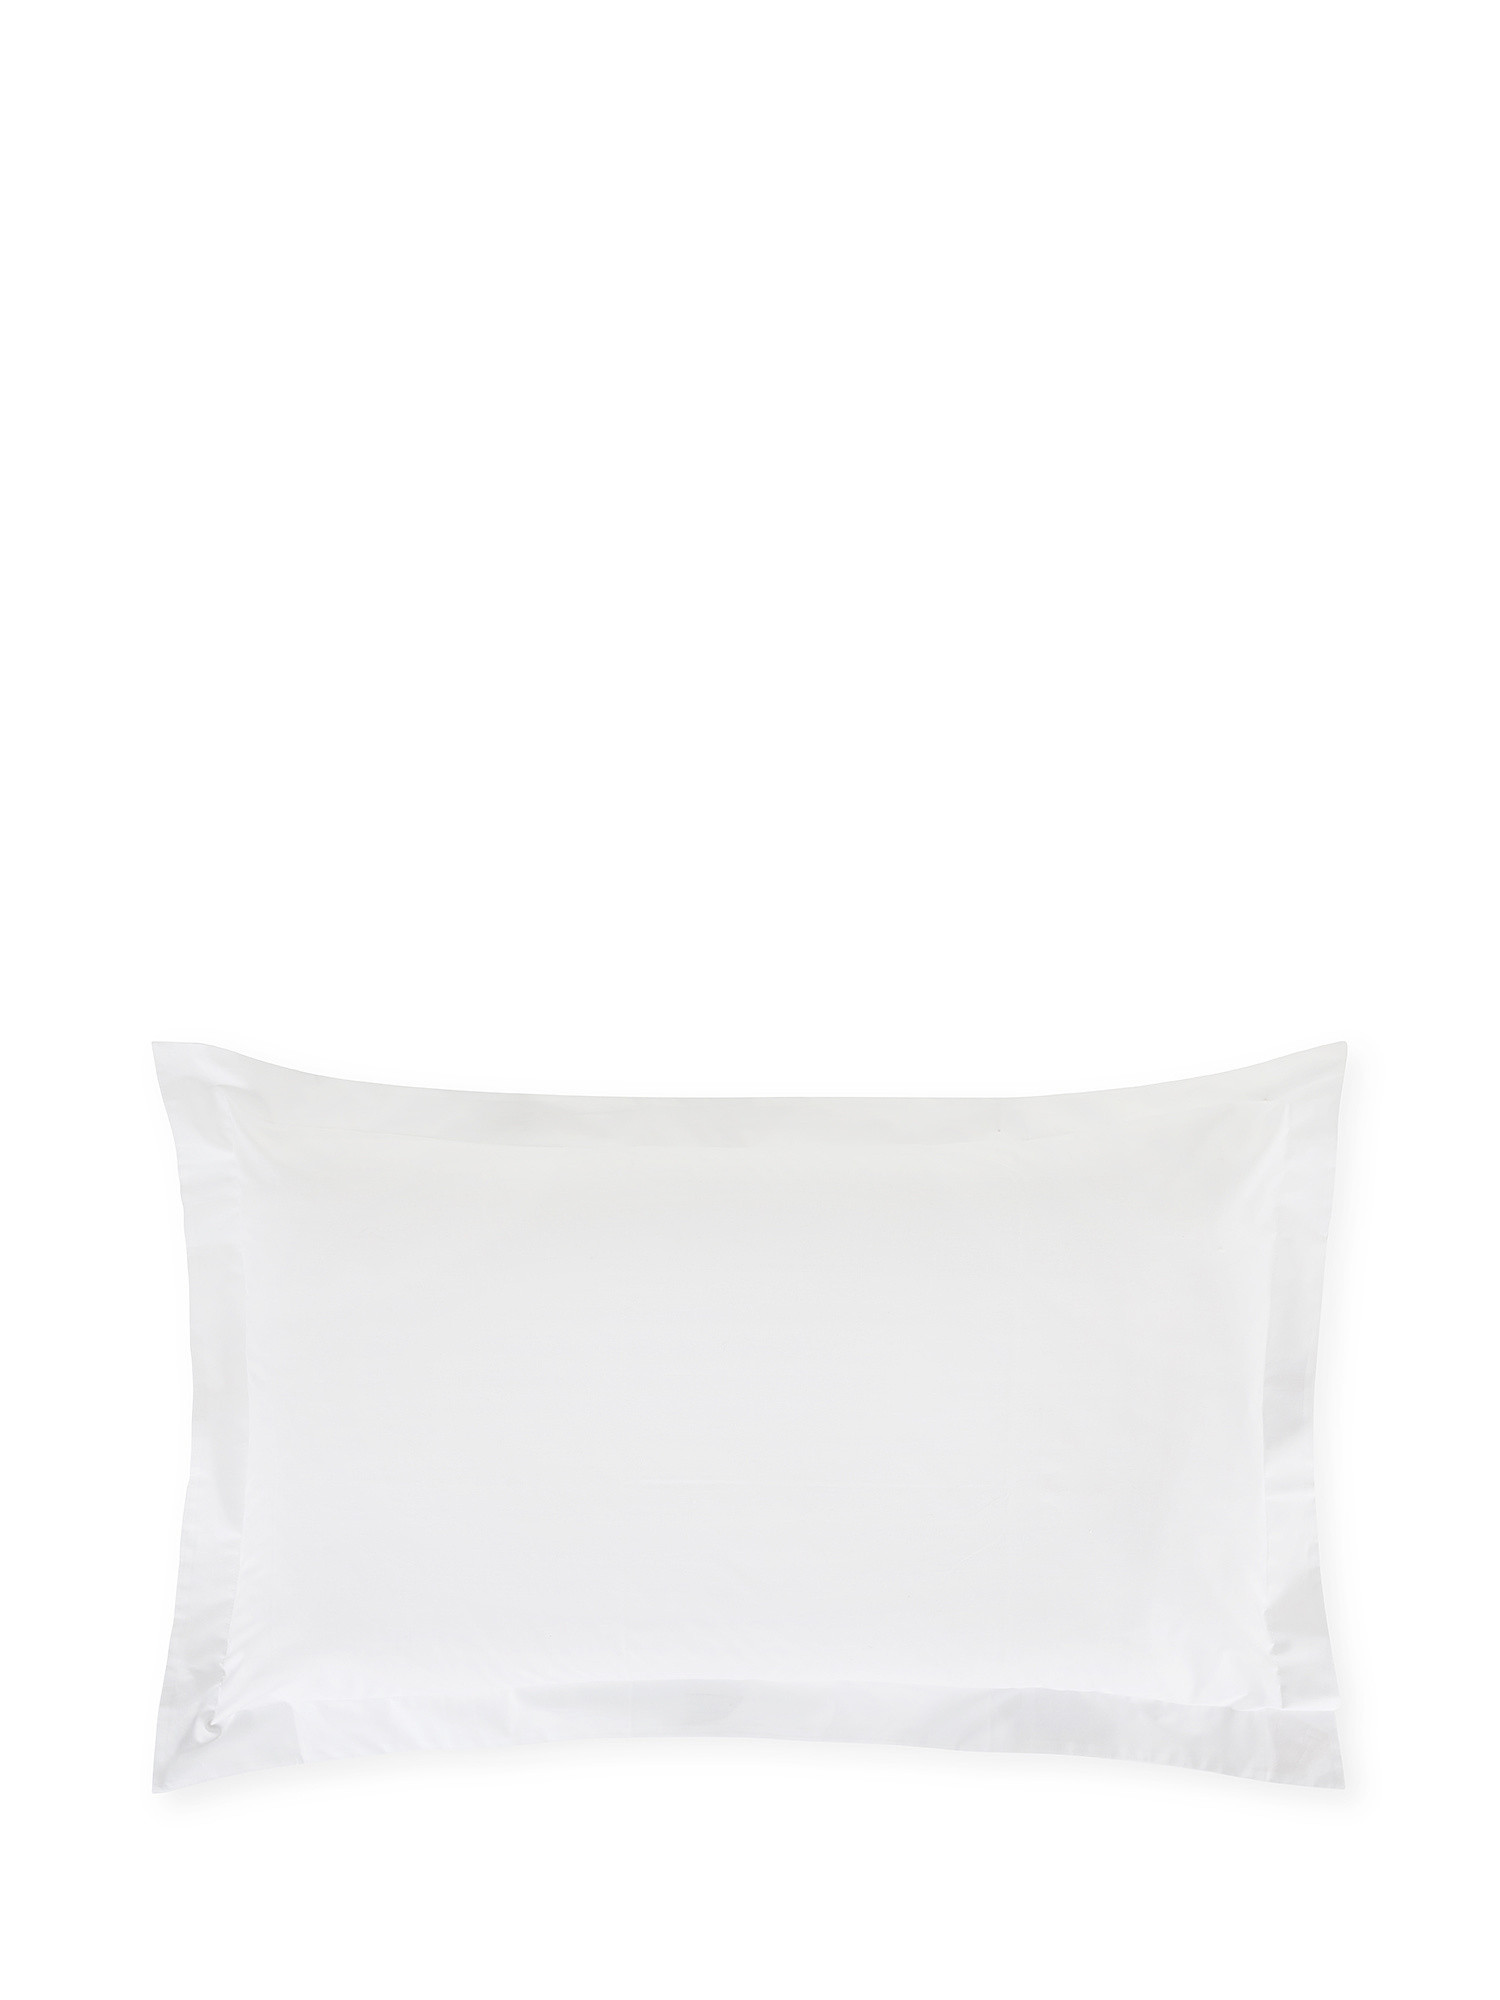 Portofino pillowcase in 100% cotton percale with frill, White, large image number 0